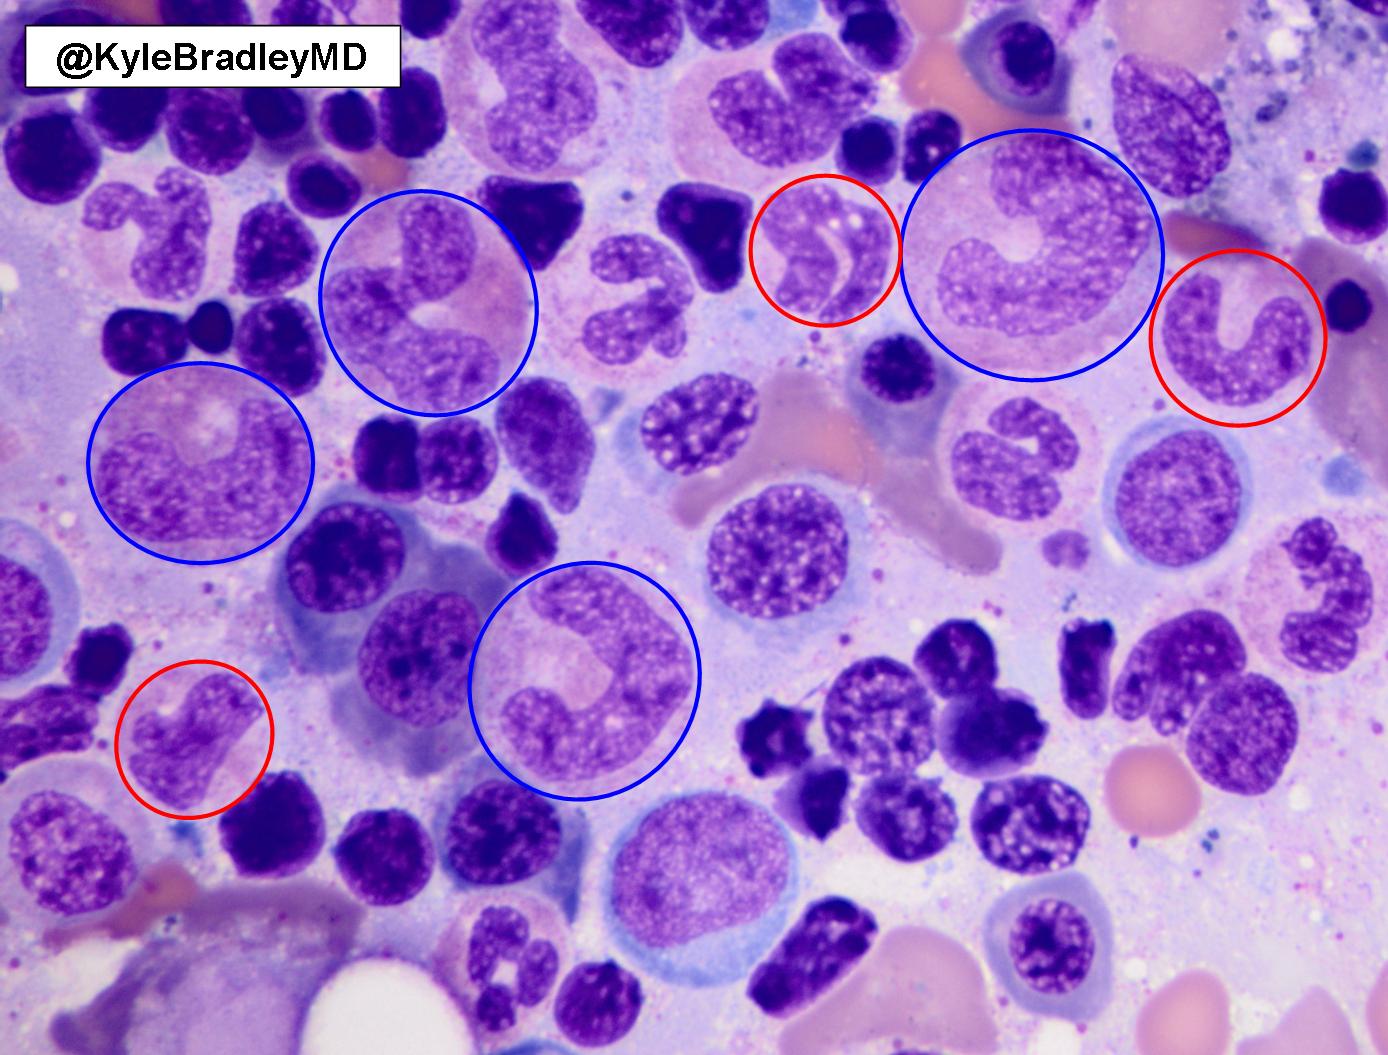 Kyle Bradley, MD on X: Megaloblastic neutrophils in bone marrow. So-called  giant bands and giant metamyelocytes (blue circles) are 1.5-2 times the  size of normal bands and metamyelocytes (red circles).   /